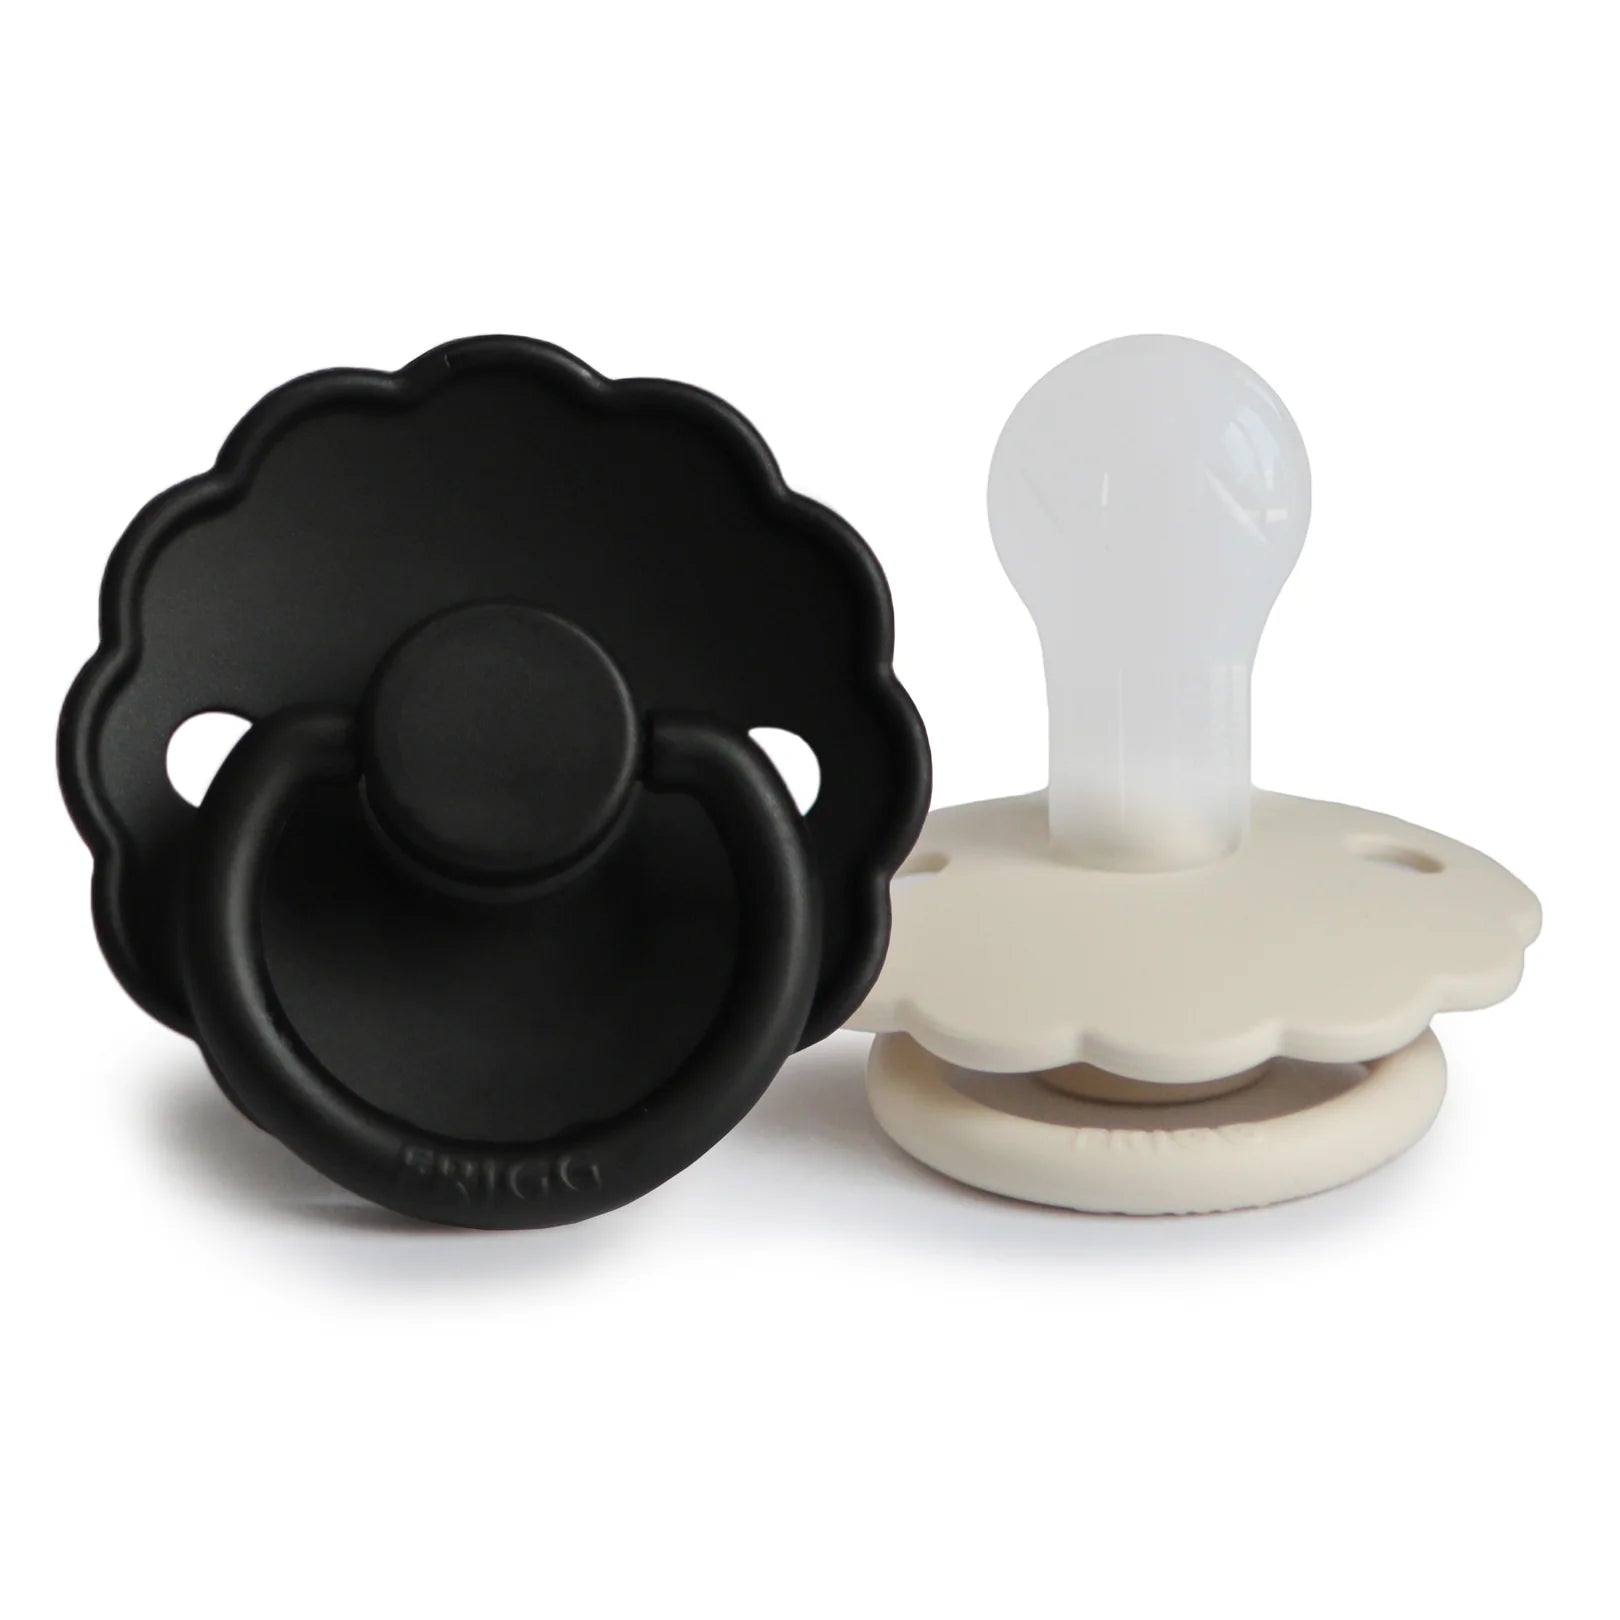 FRIGG Daisy Silicone Baby Pacifier (Jet Black/Cream) 2-Pack